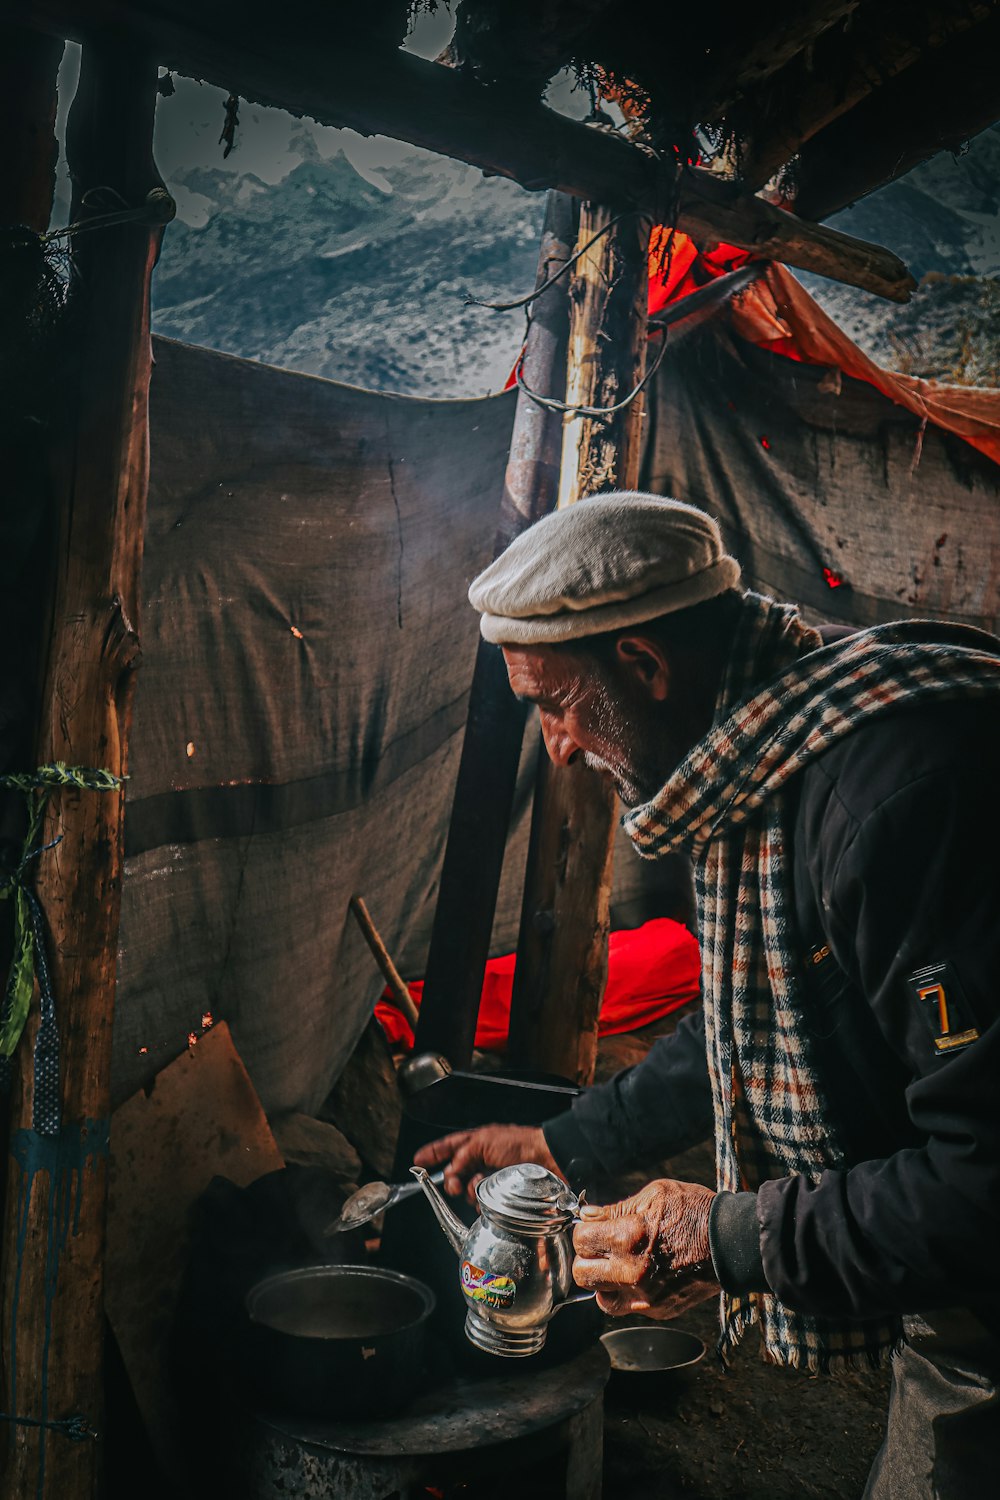 a man is cooking food in a tent